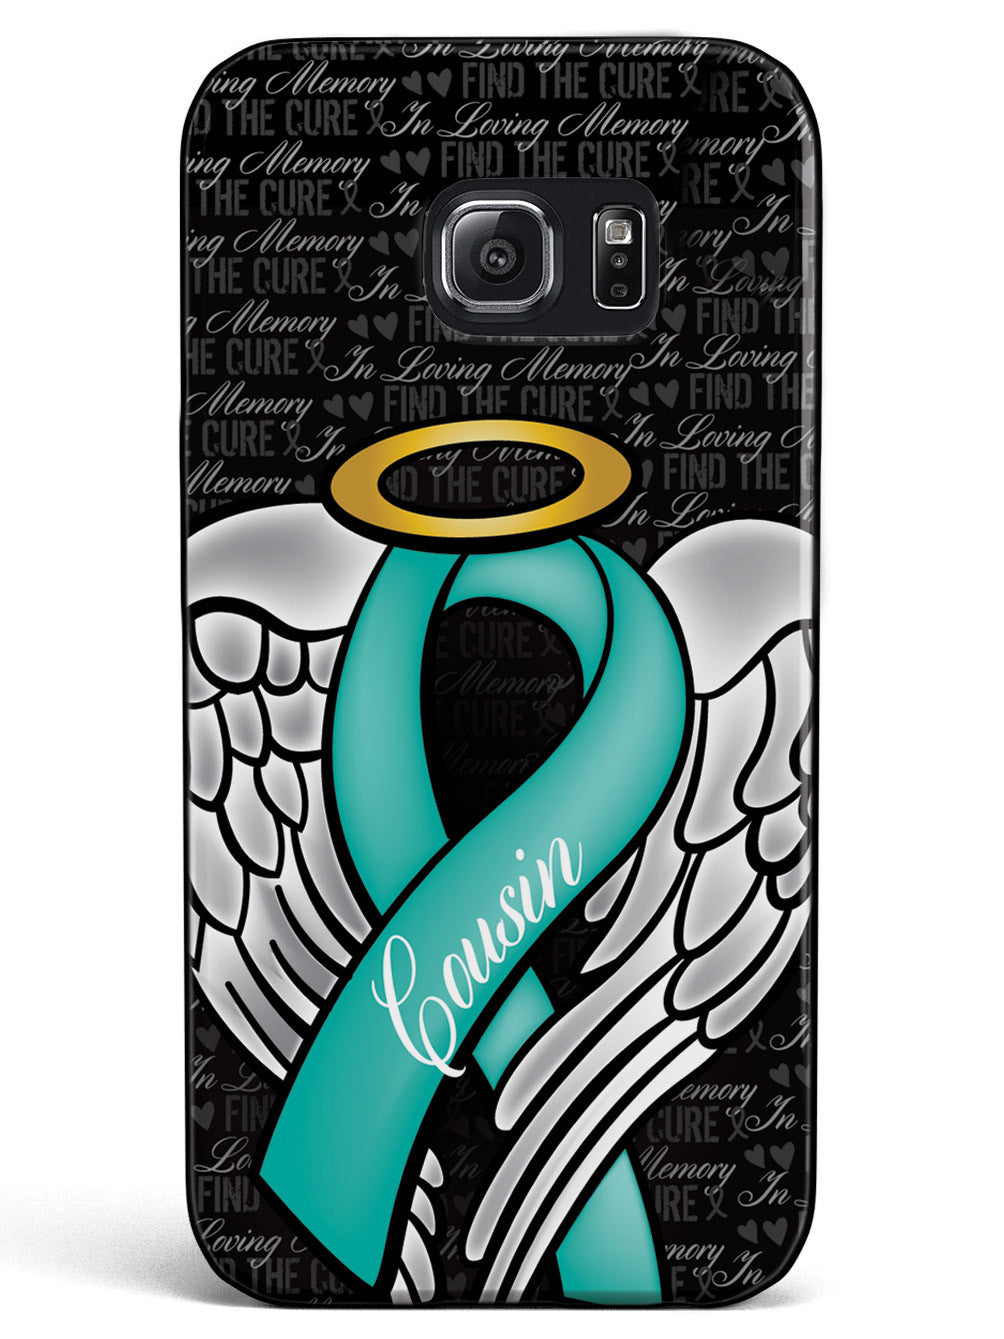 In Loving Memory of My Cousin - Teal Ribbon Case